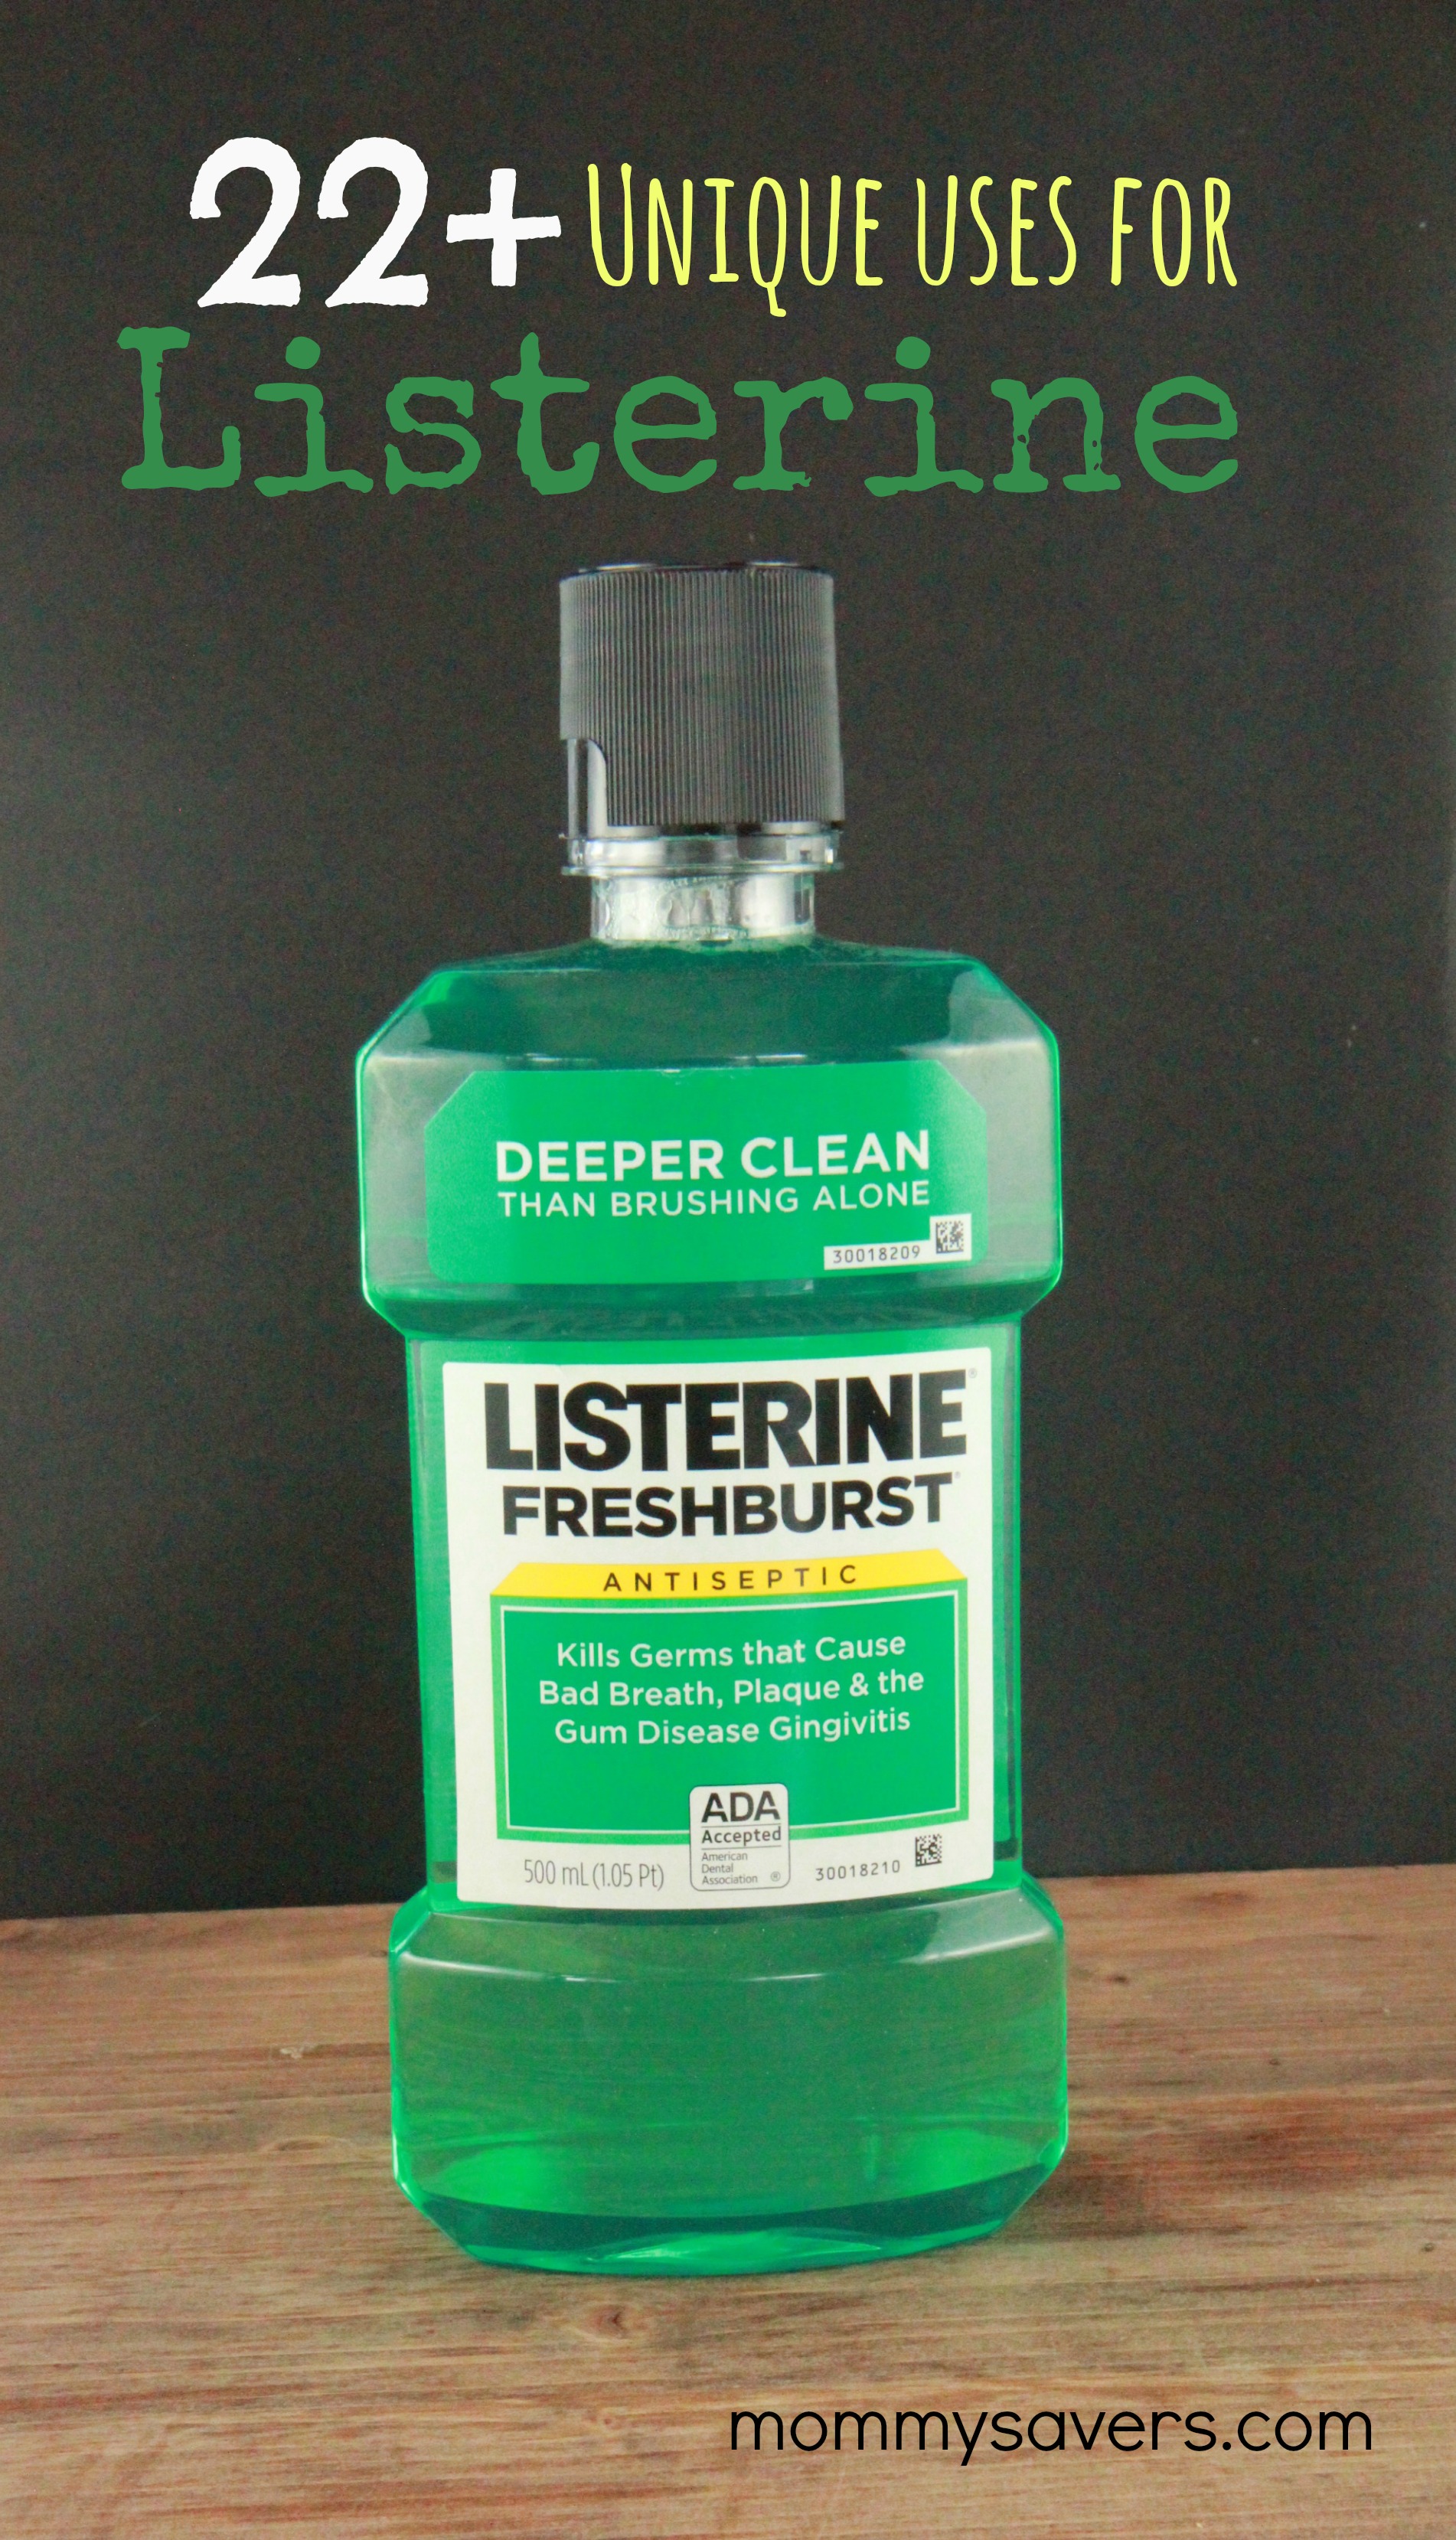 22 Unique Uses For Listerine Mouthwash Mommysavers